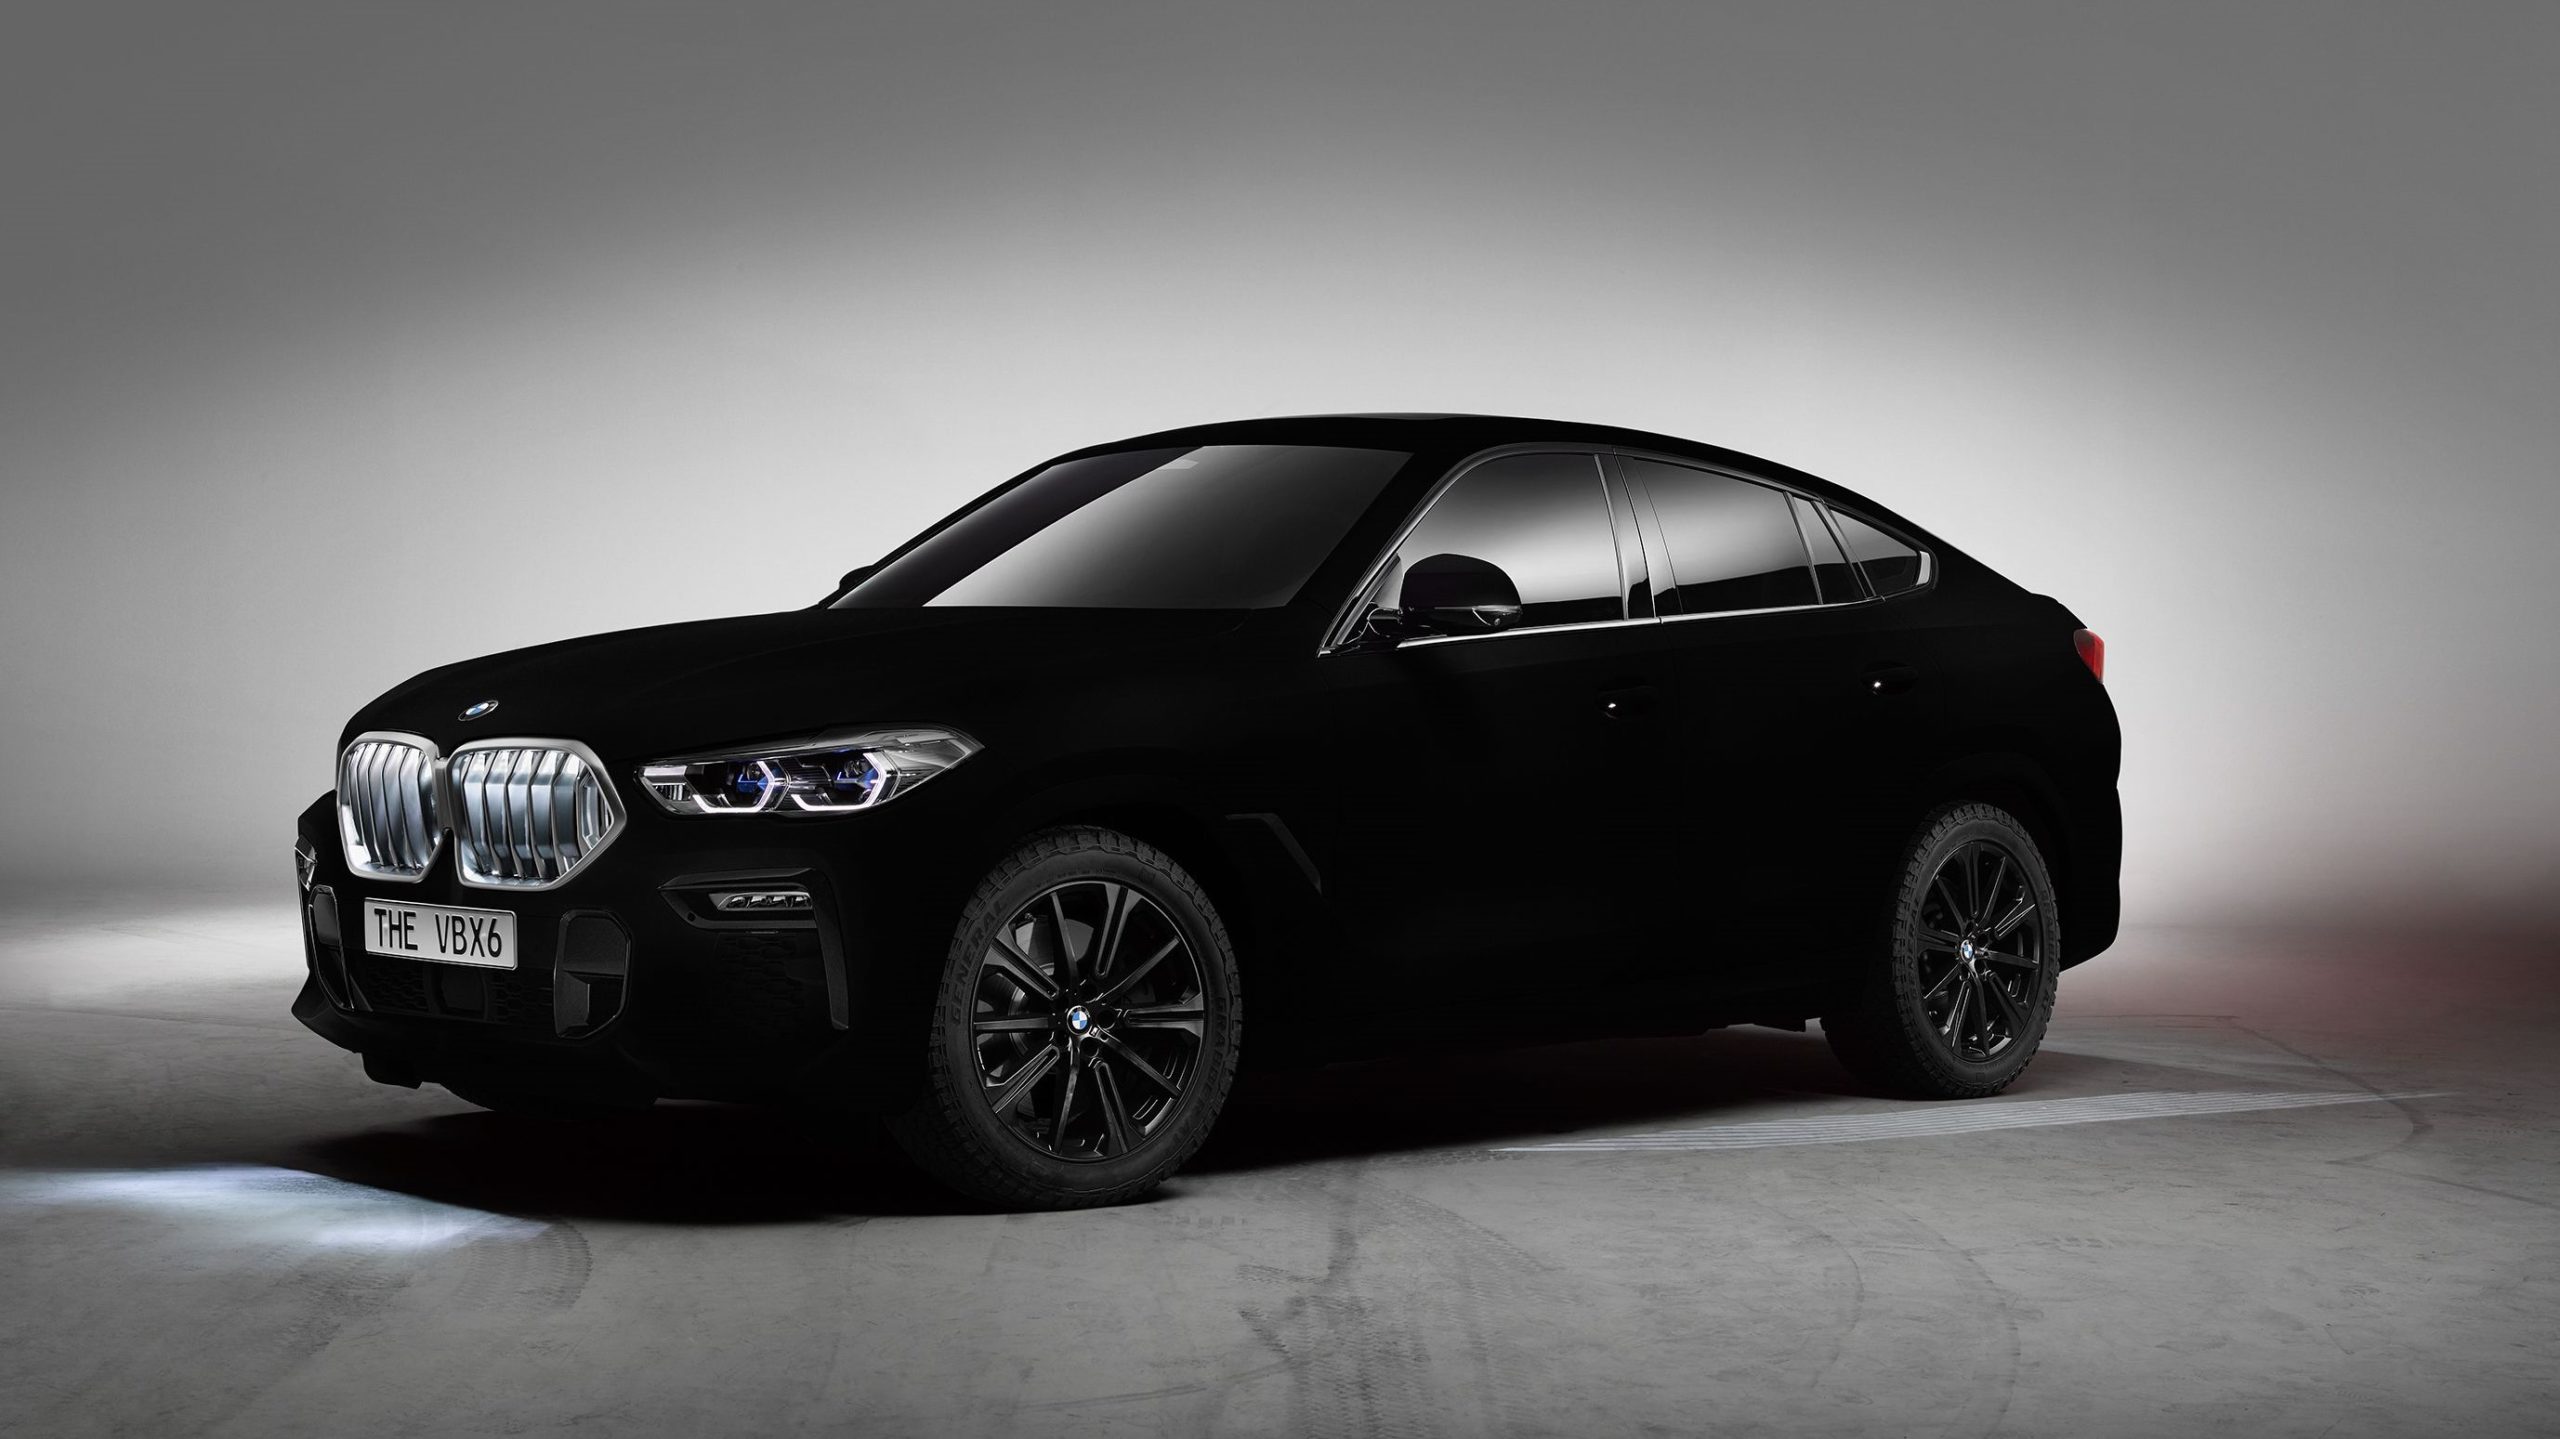 This Impossibly Black Lancer Evolution Uses Special Paint To Break Your Brain